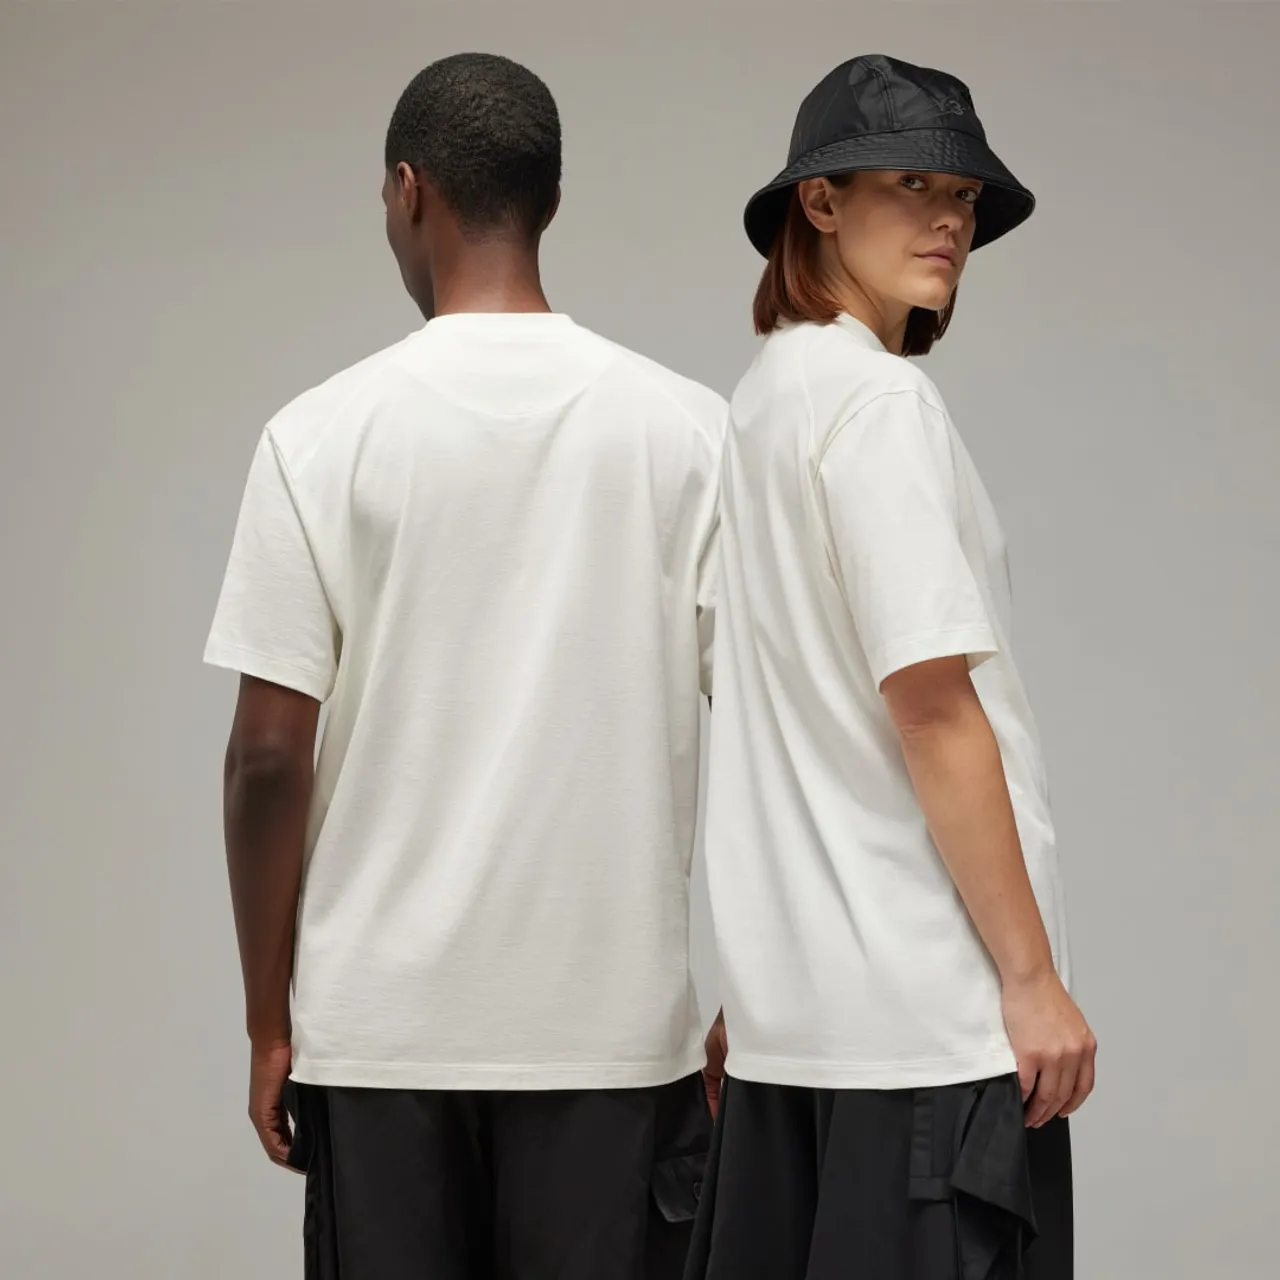 Y-3 Graphic Short Sleeve T-Shirt